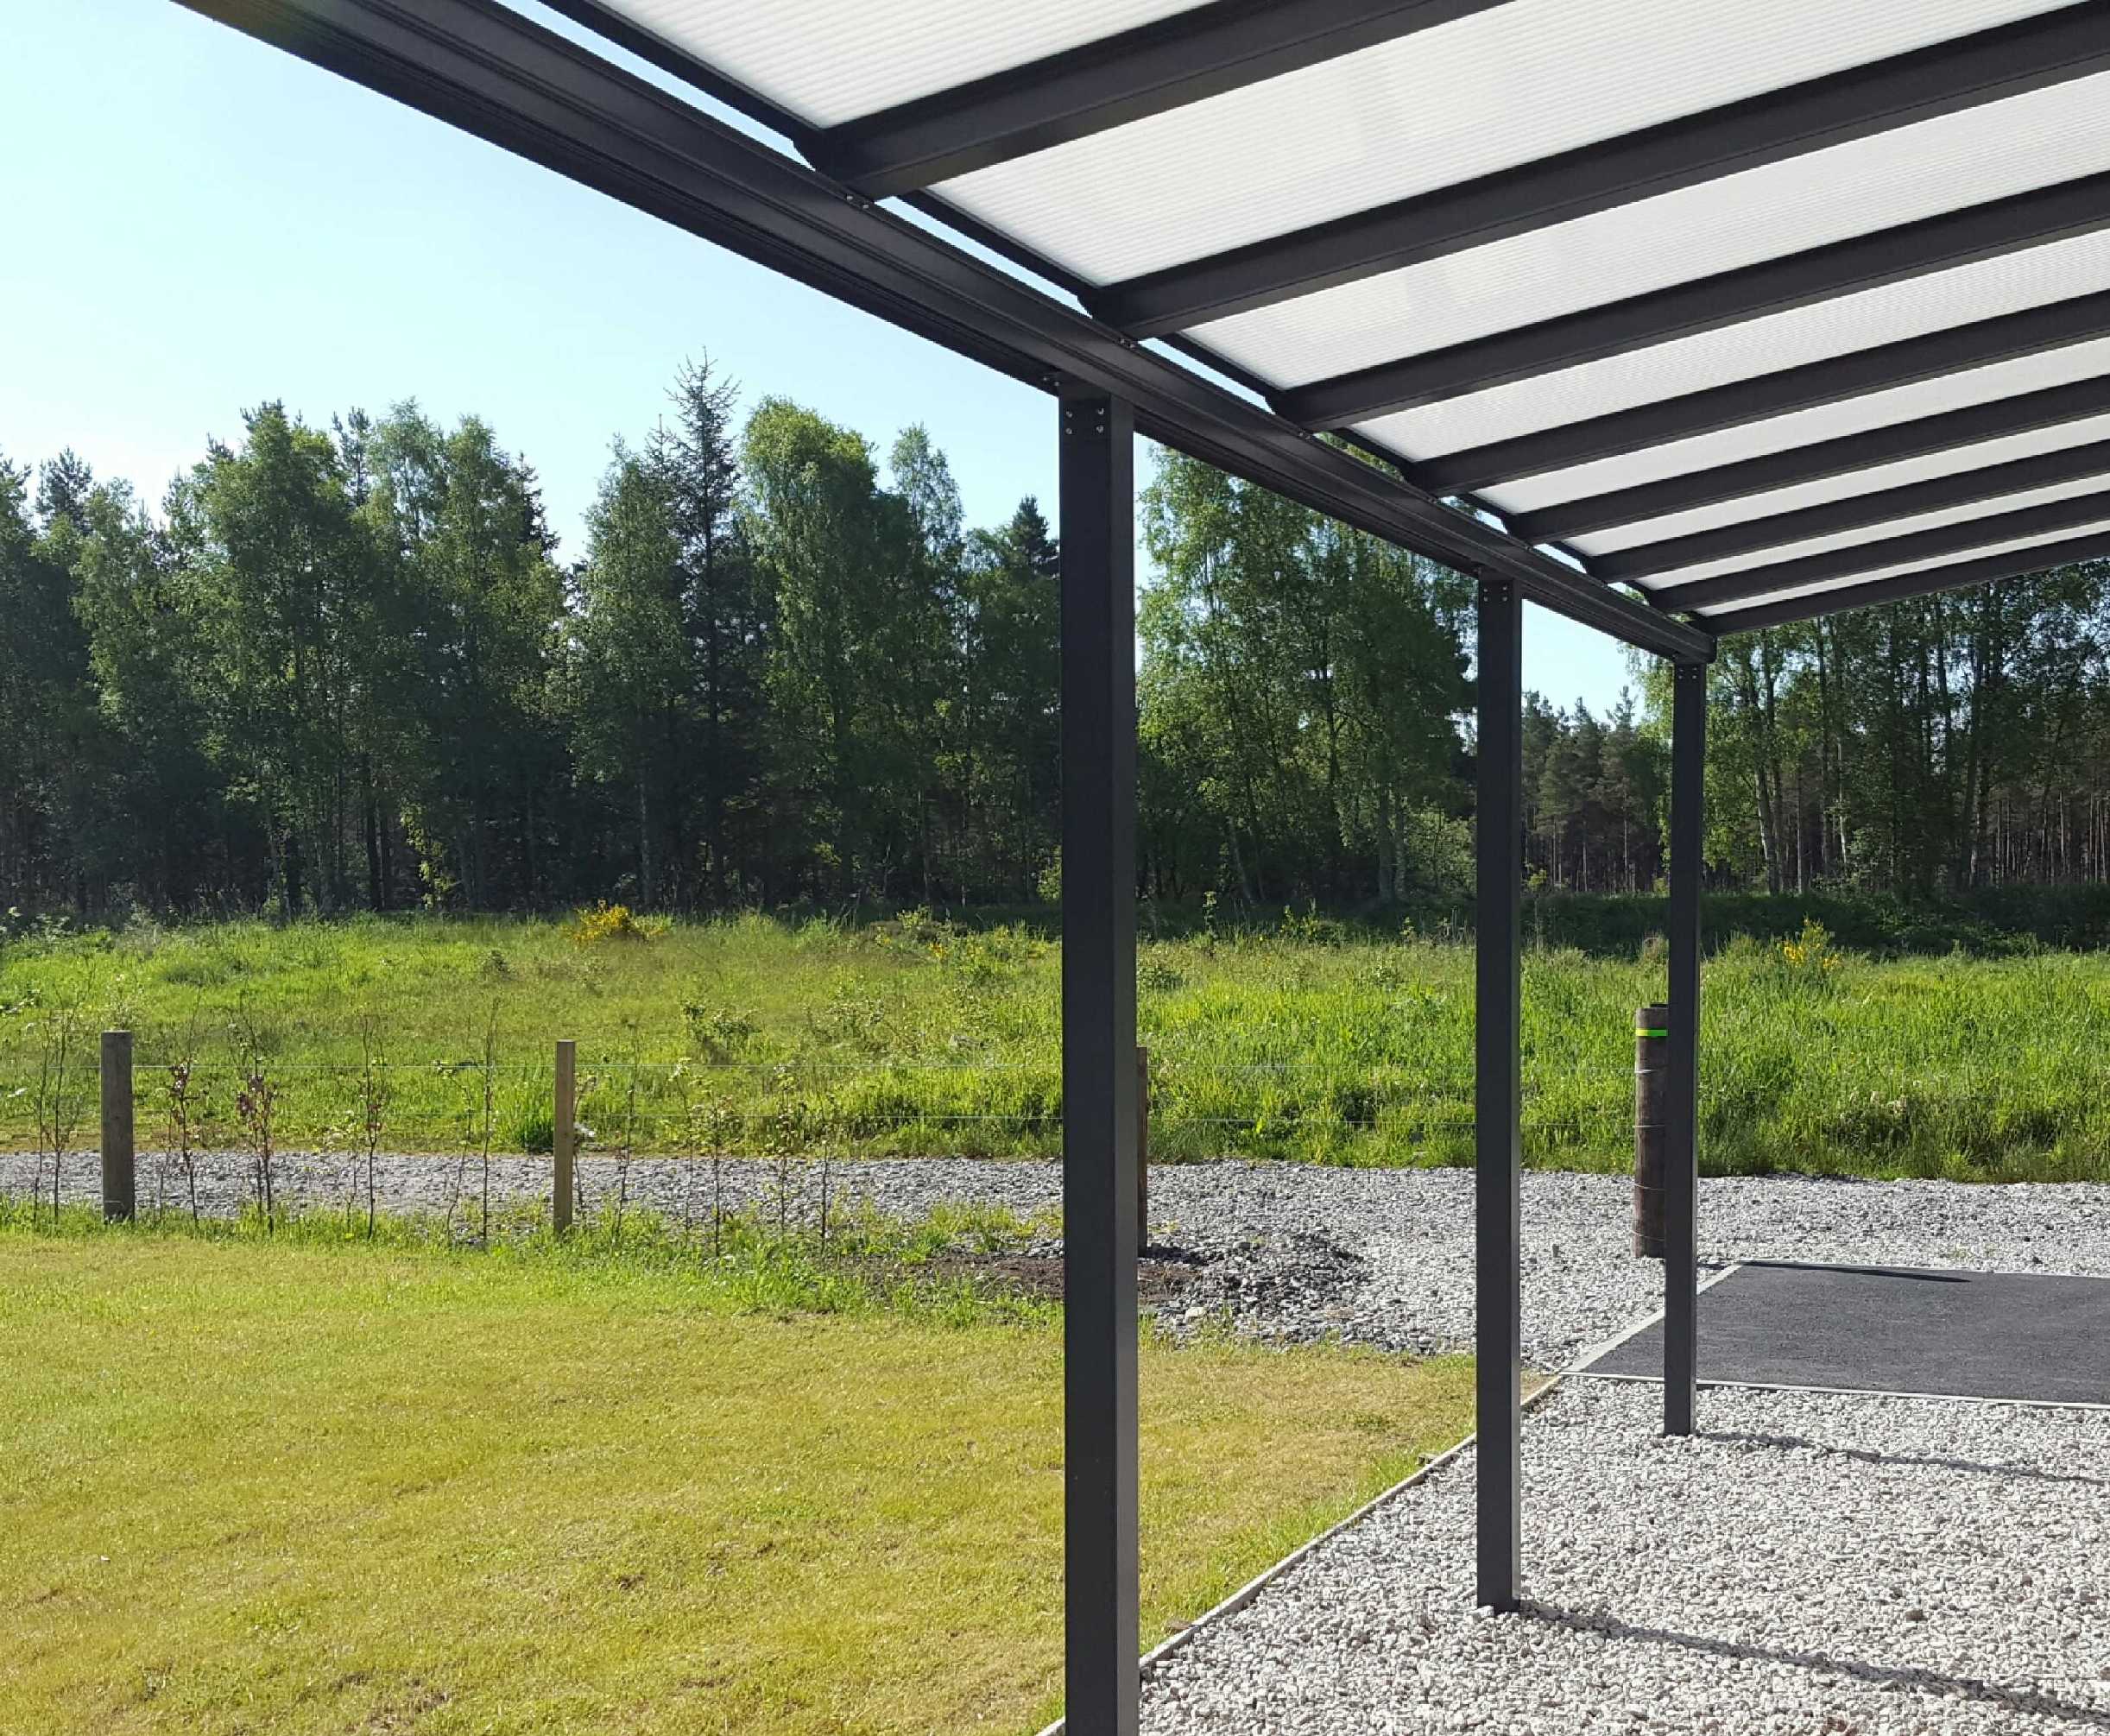 Omega Smart Lean-To Canopy, Anthracite Grey, 16mm Polycarbonate Glazing - 6.0m (W) x 2.0m (P), (3) Supporting Posts